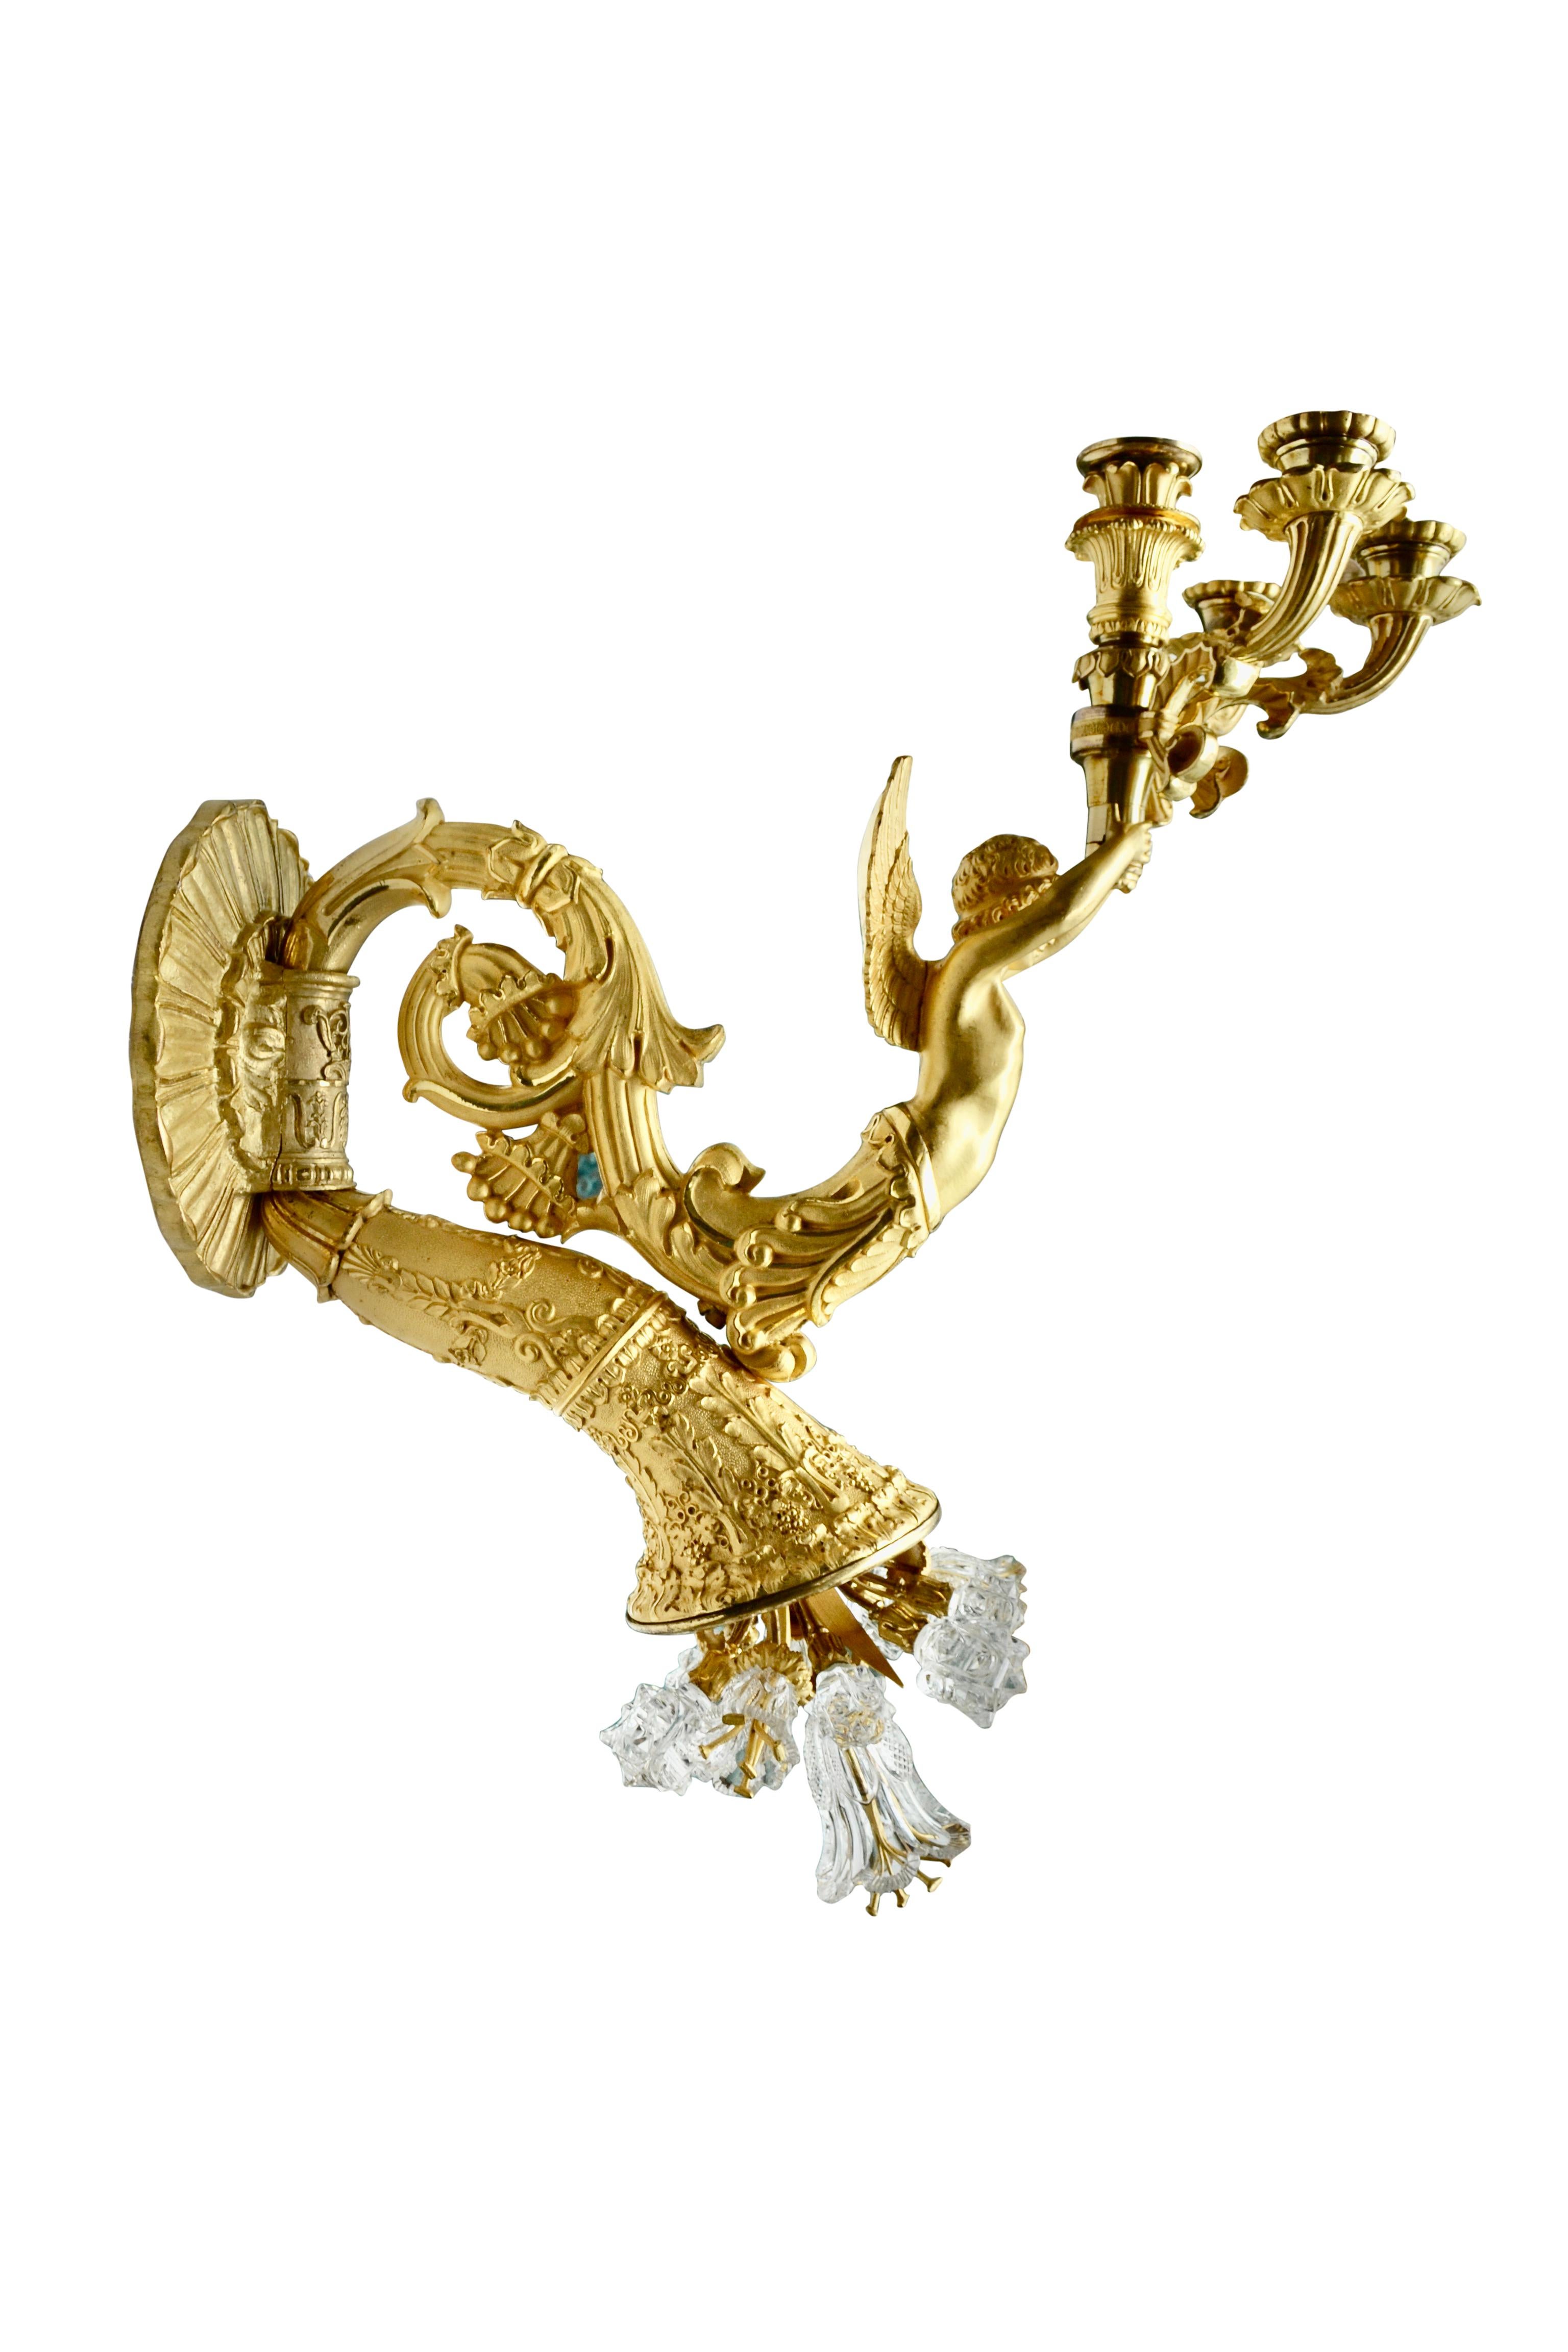 Large French Empire Gilt Bronze and Crystal Sconce Attributed to Thomire In Good Condition For Sale In Vancouver, British Columbia